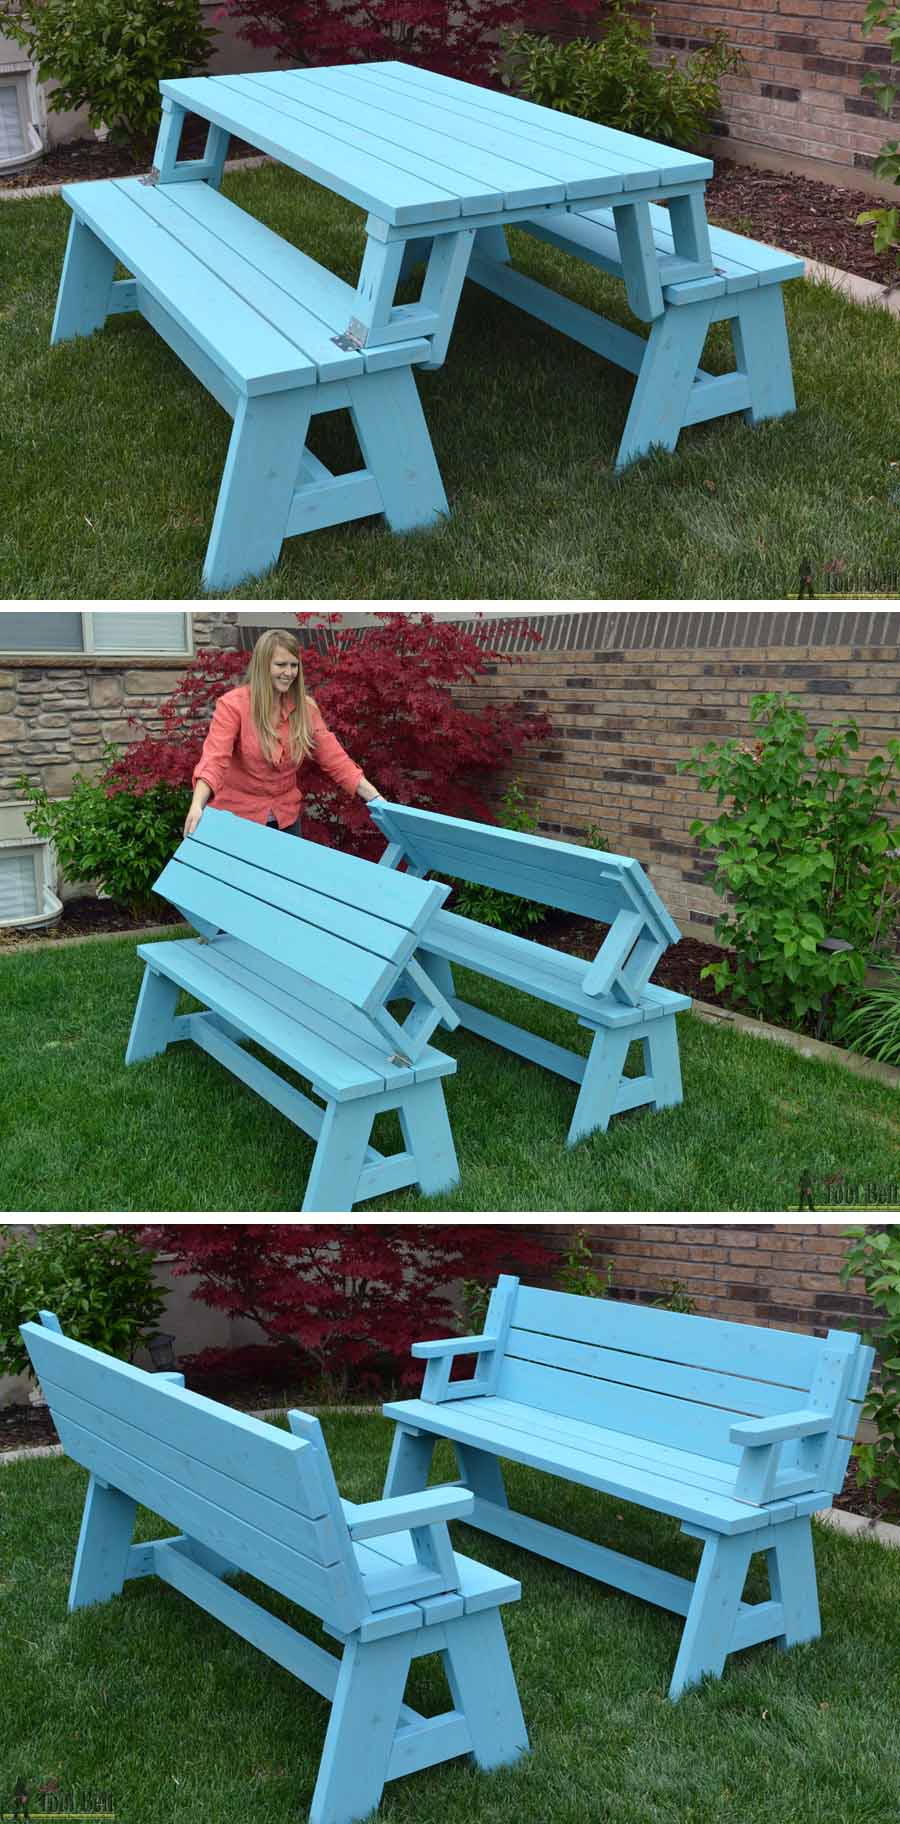  picnic table’s top folds down to create the back of the bench, for a